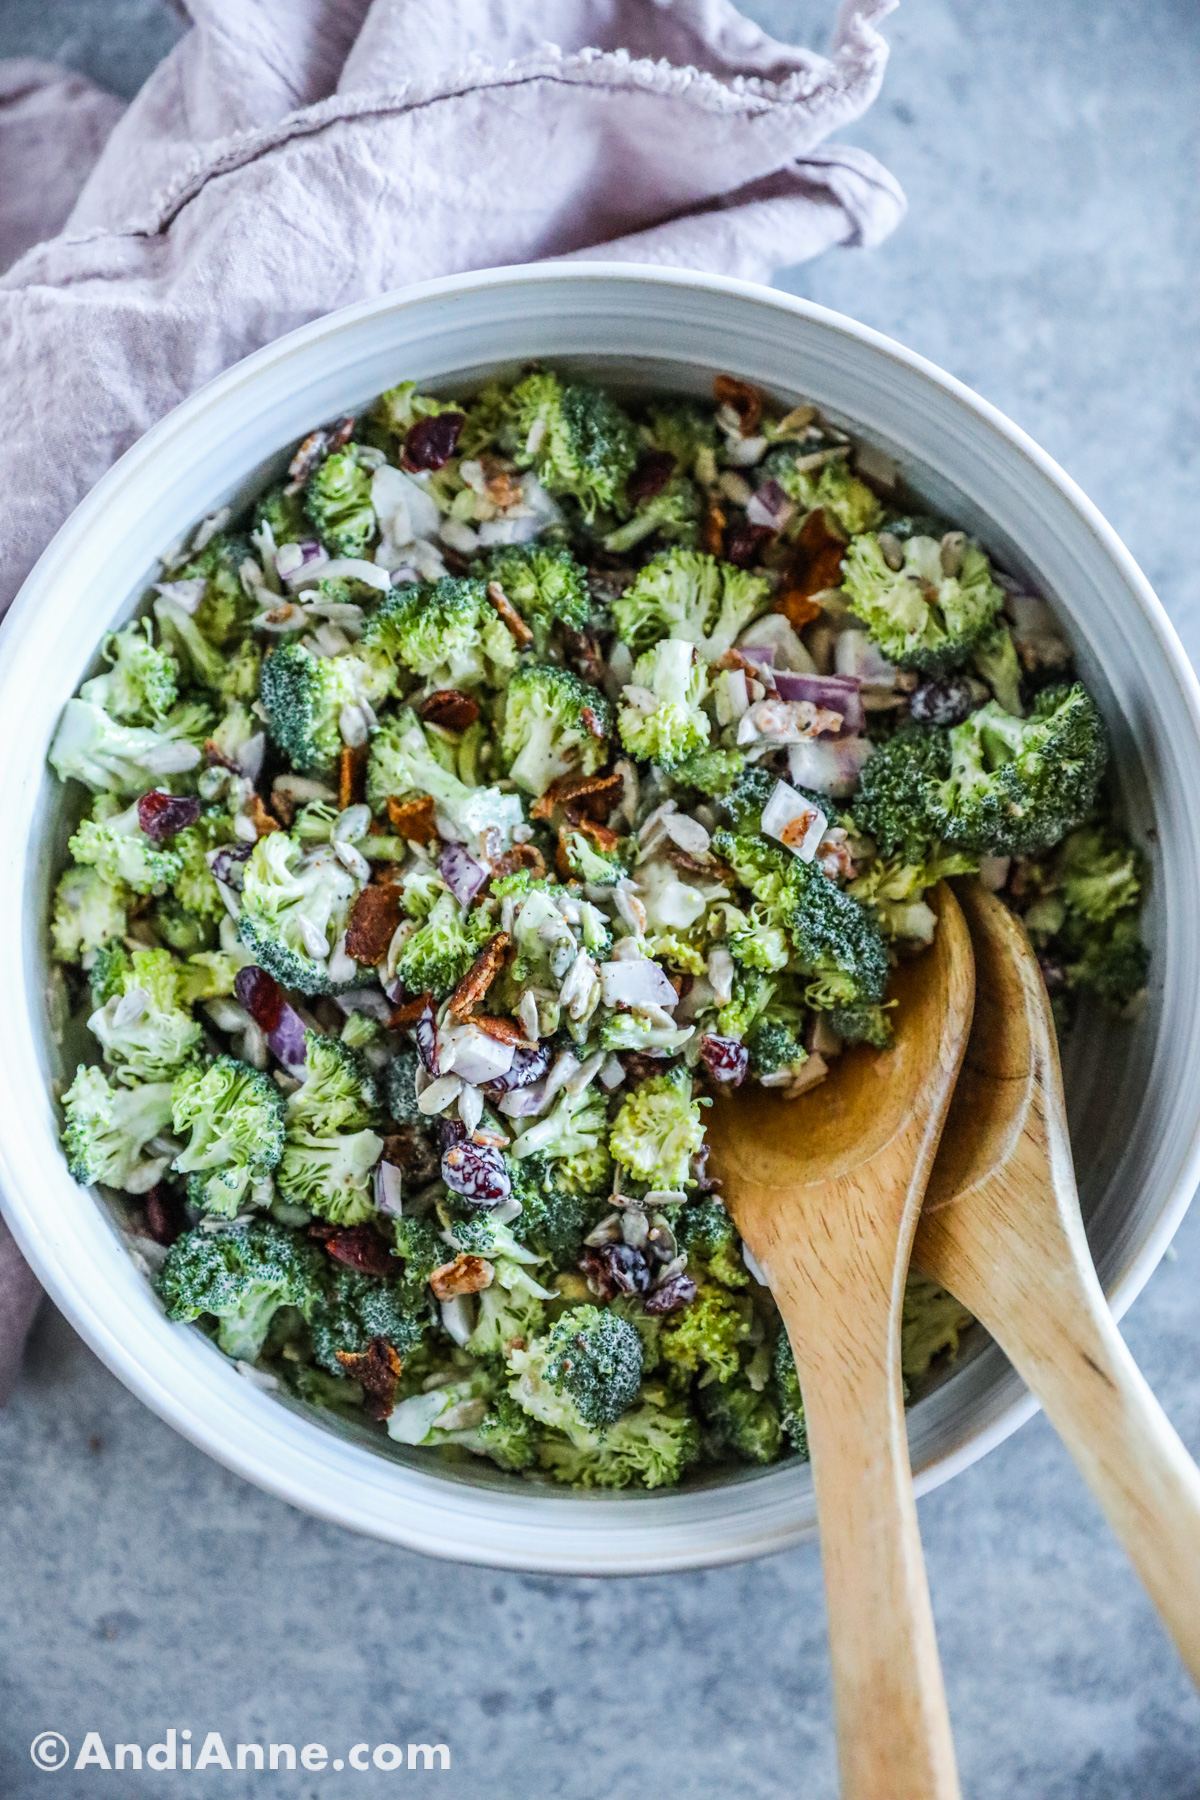 Looking down at creamy broccoli crunch salad in a white bowl with two wood salad spoons.